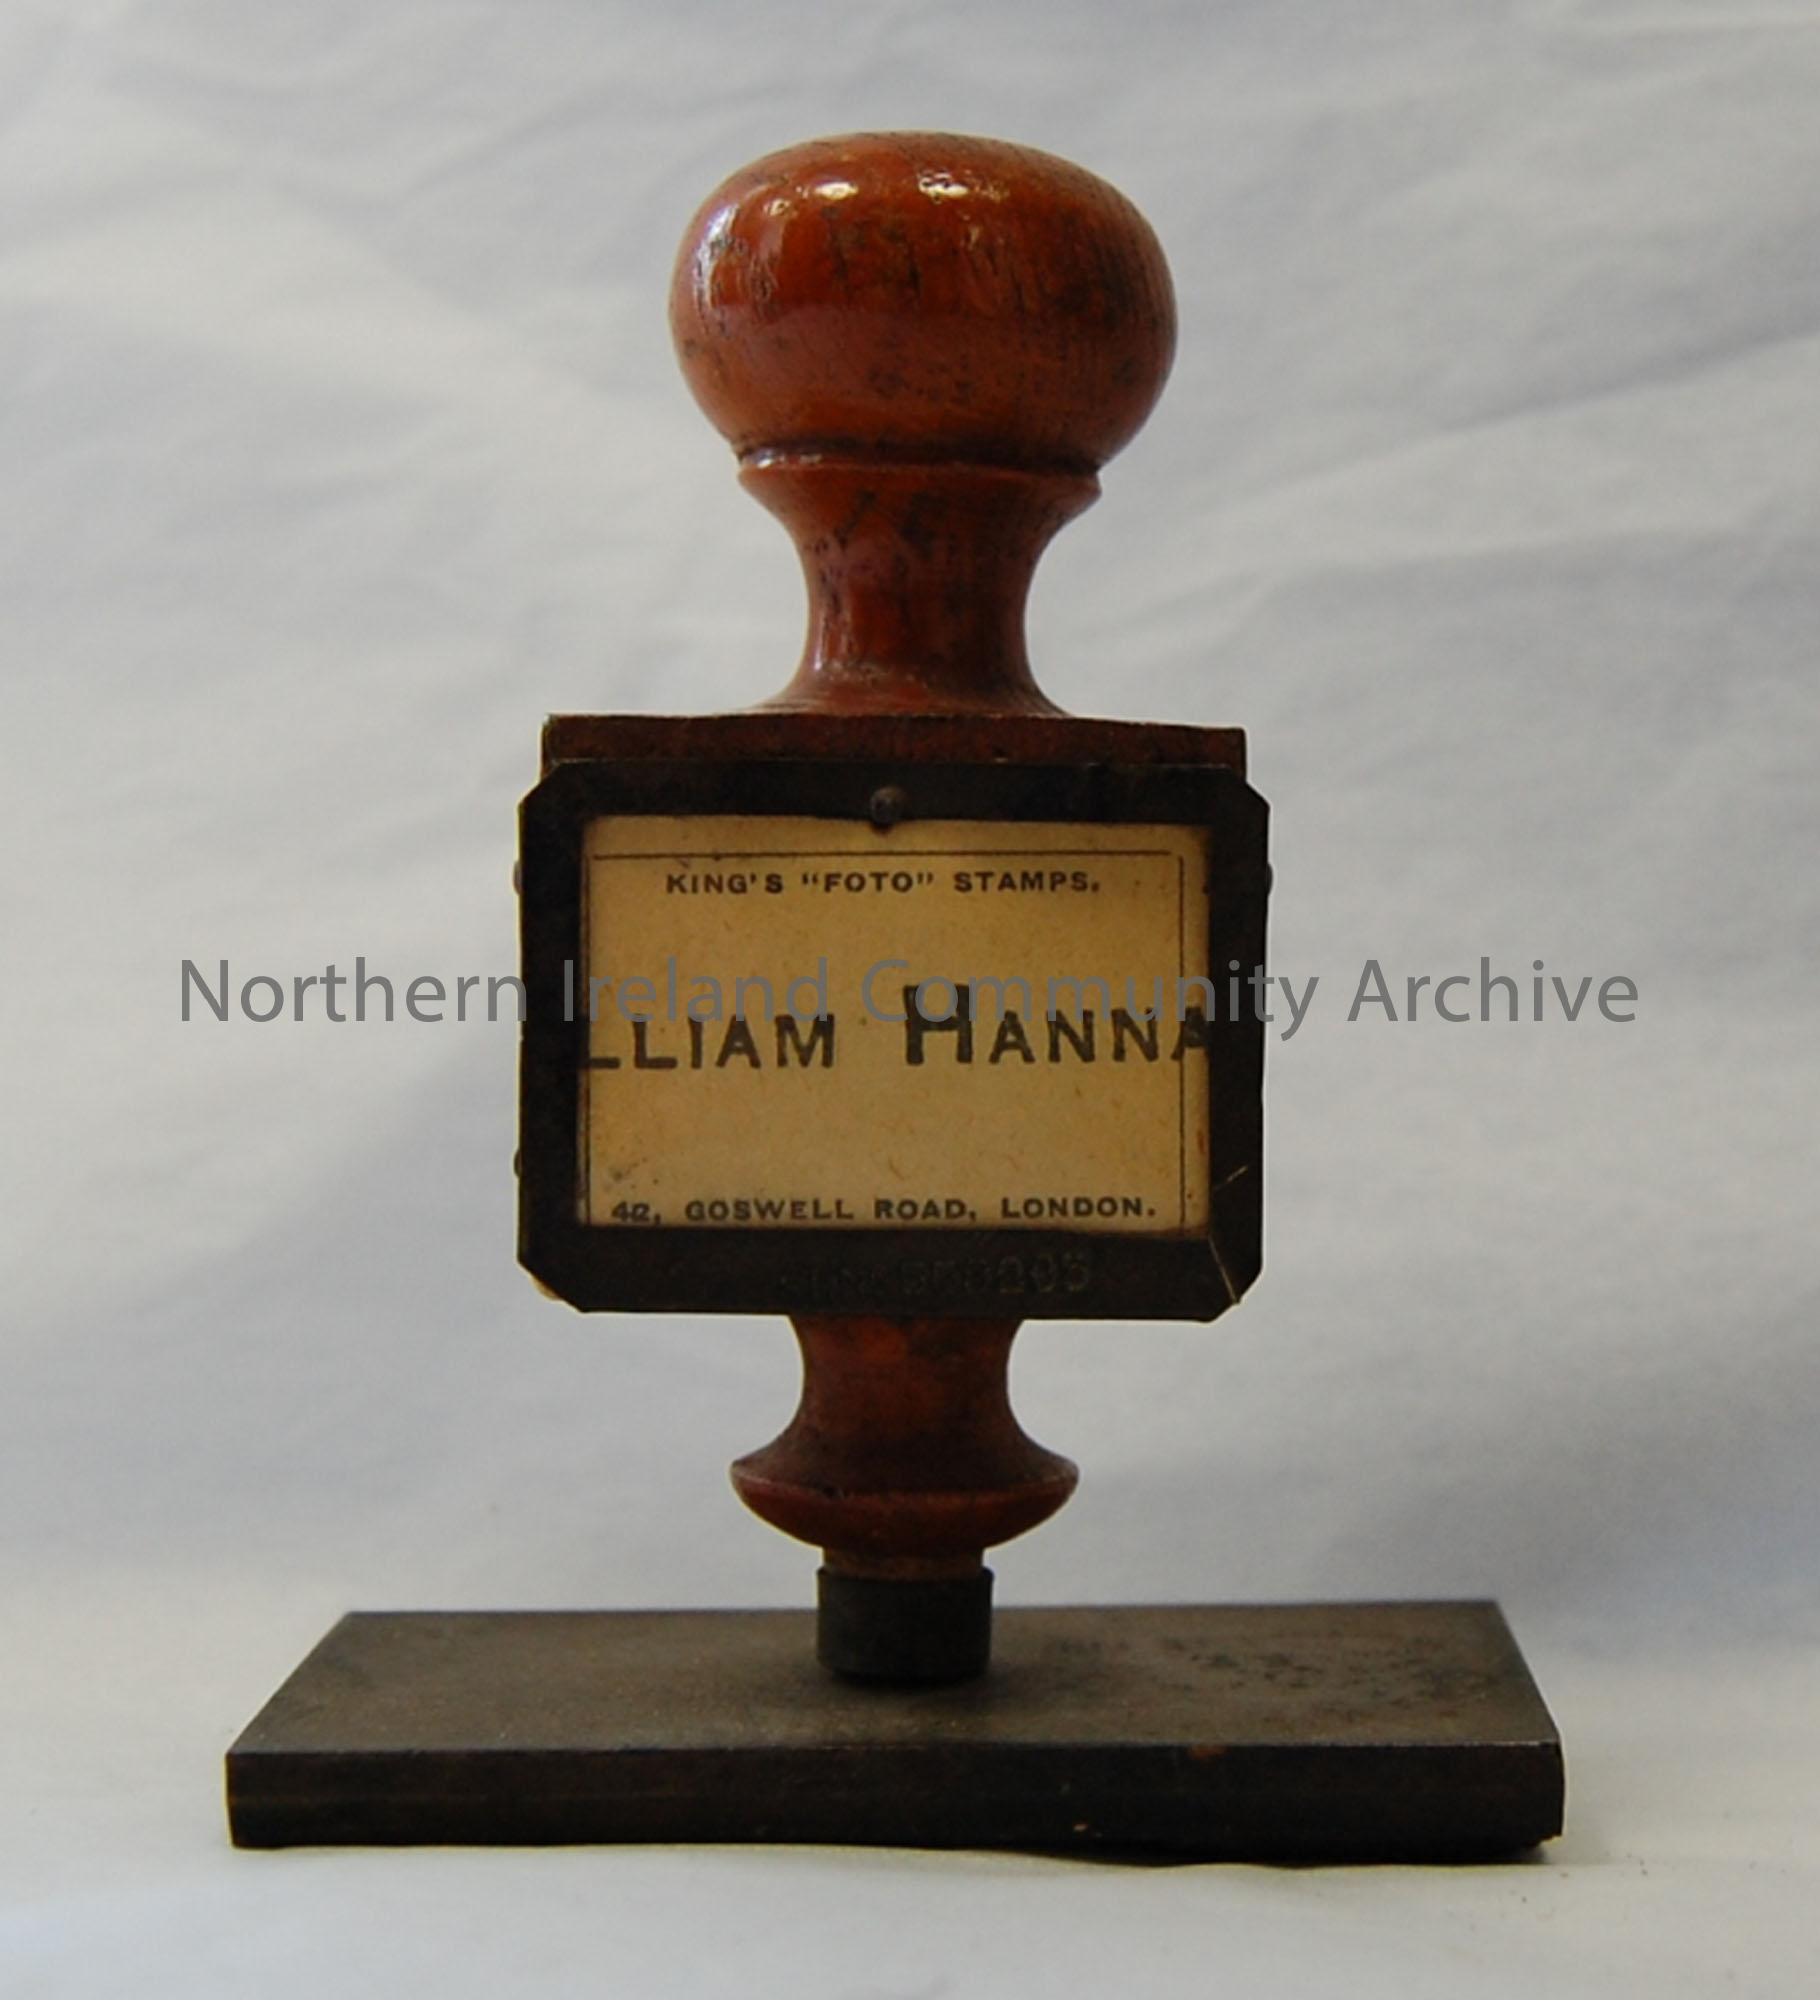 William Hannah rubber stamp with wooden handle with small plaque.